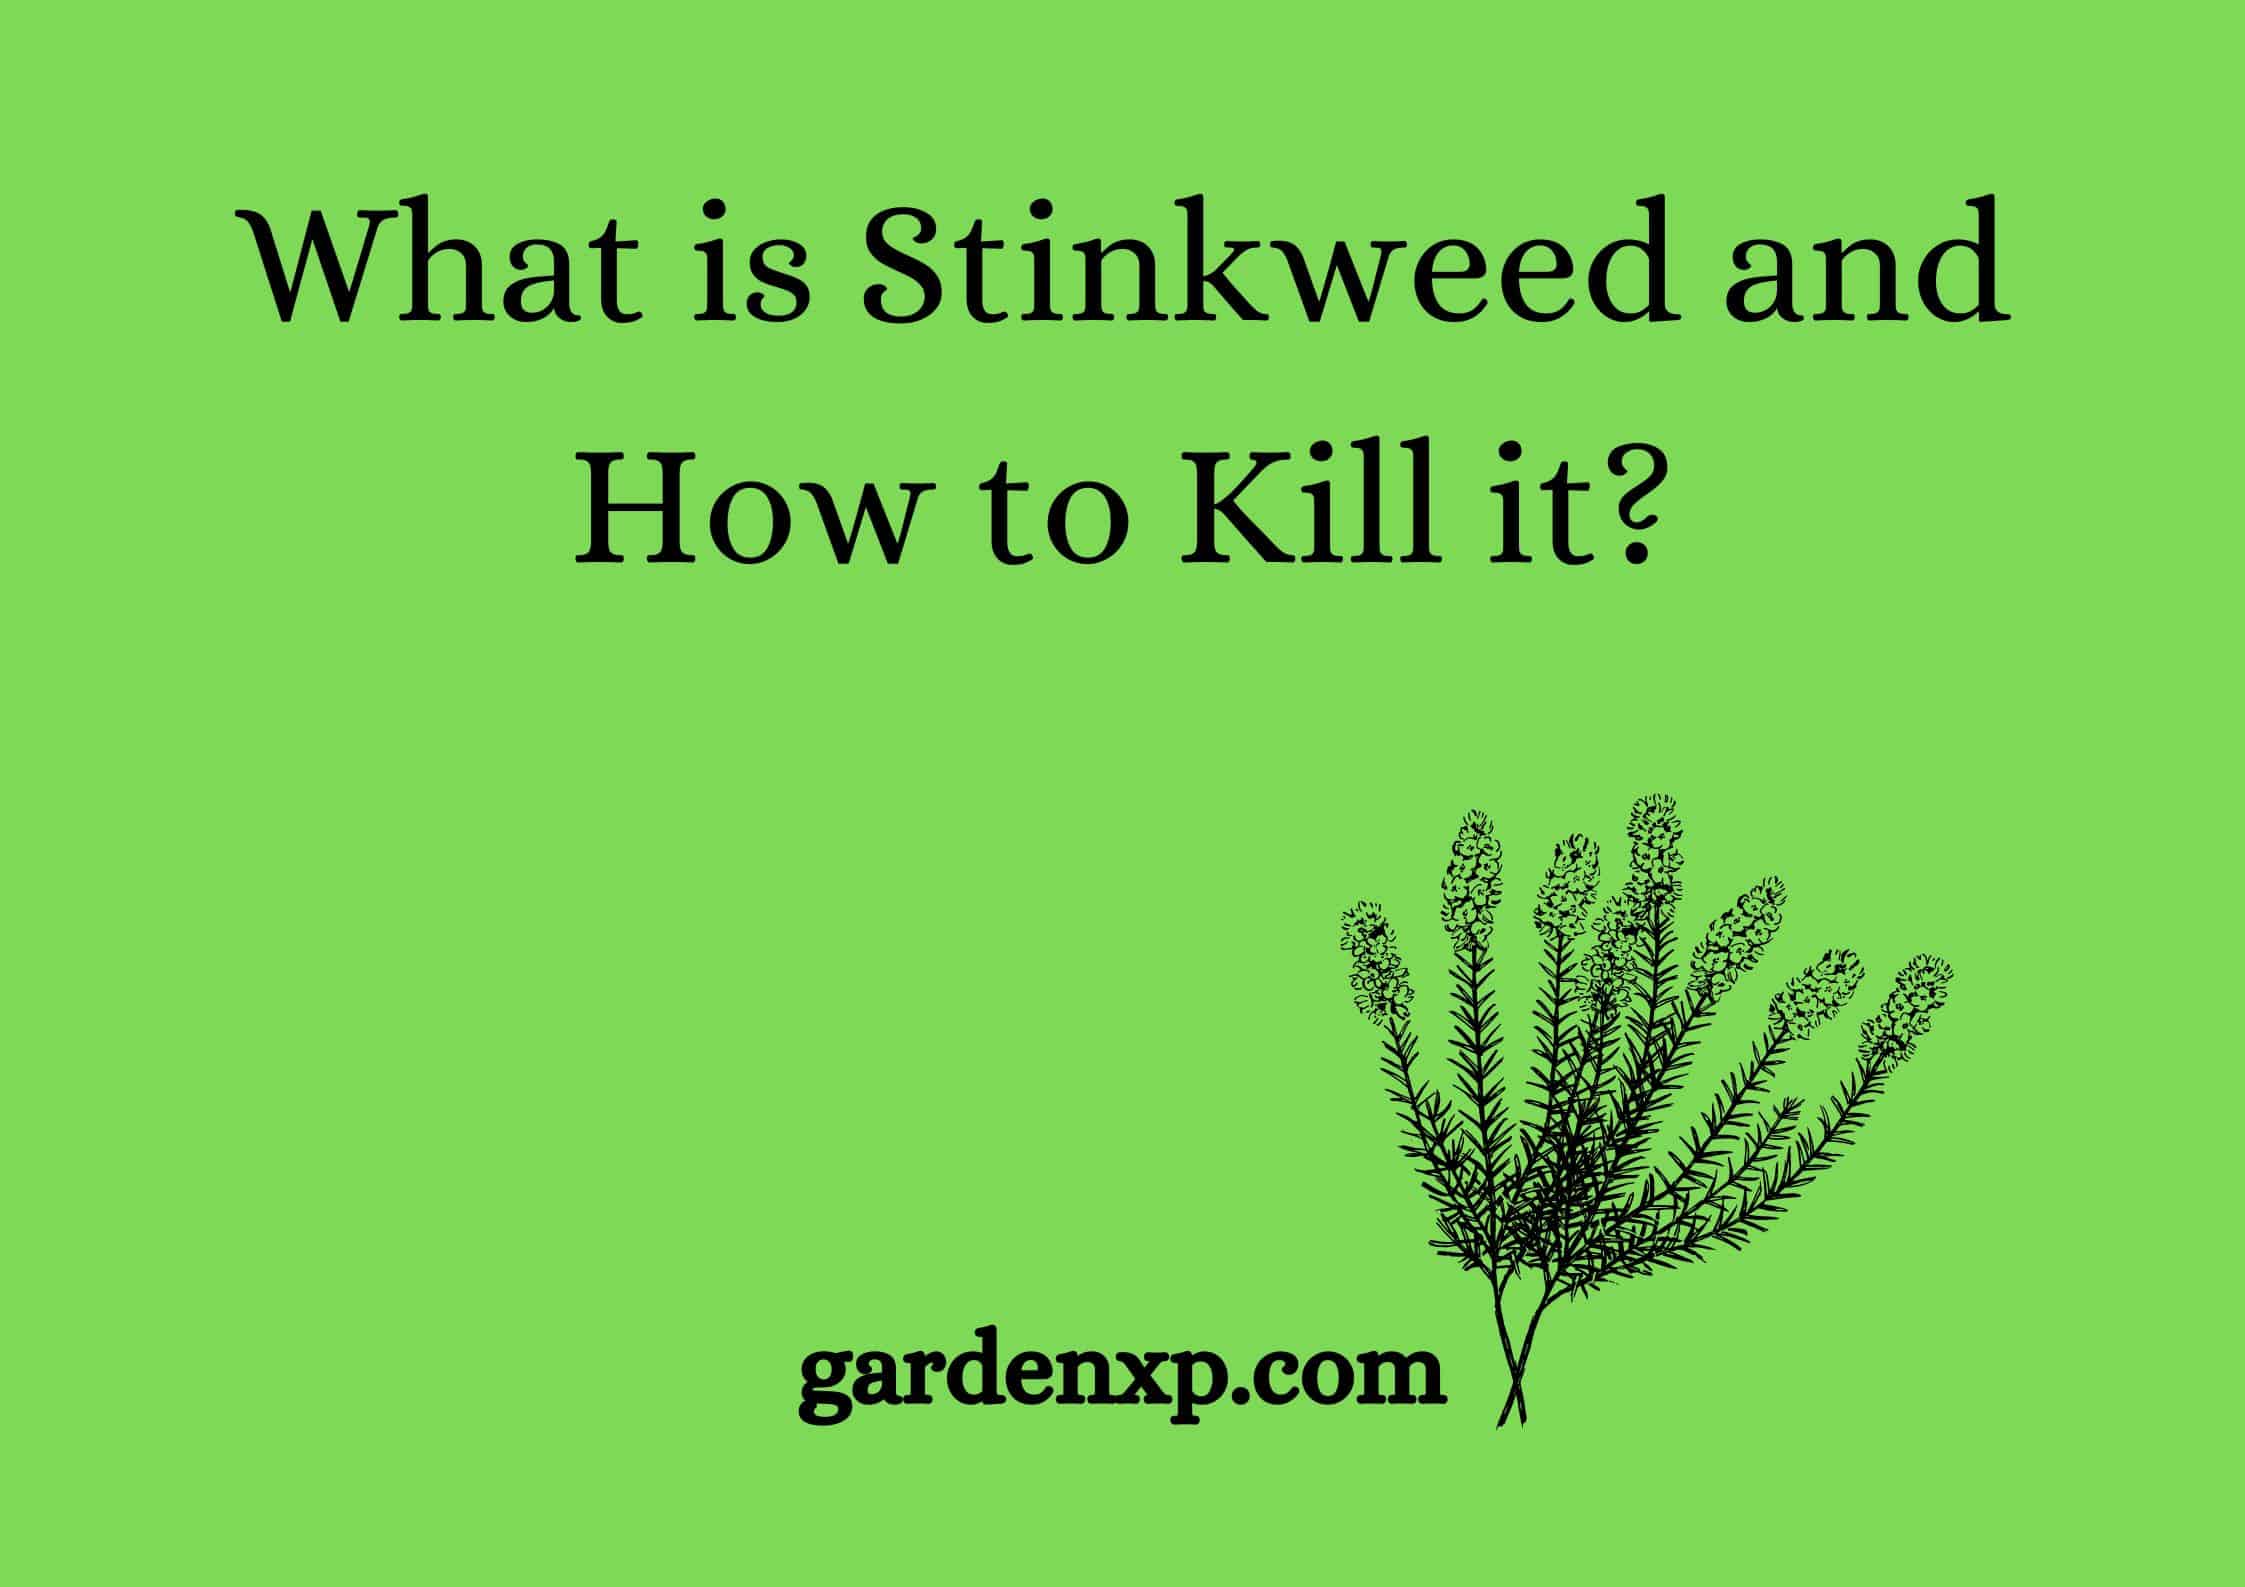 What is Stinkweed and How to Kill it?